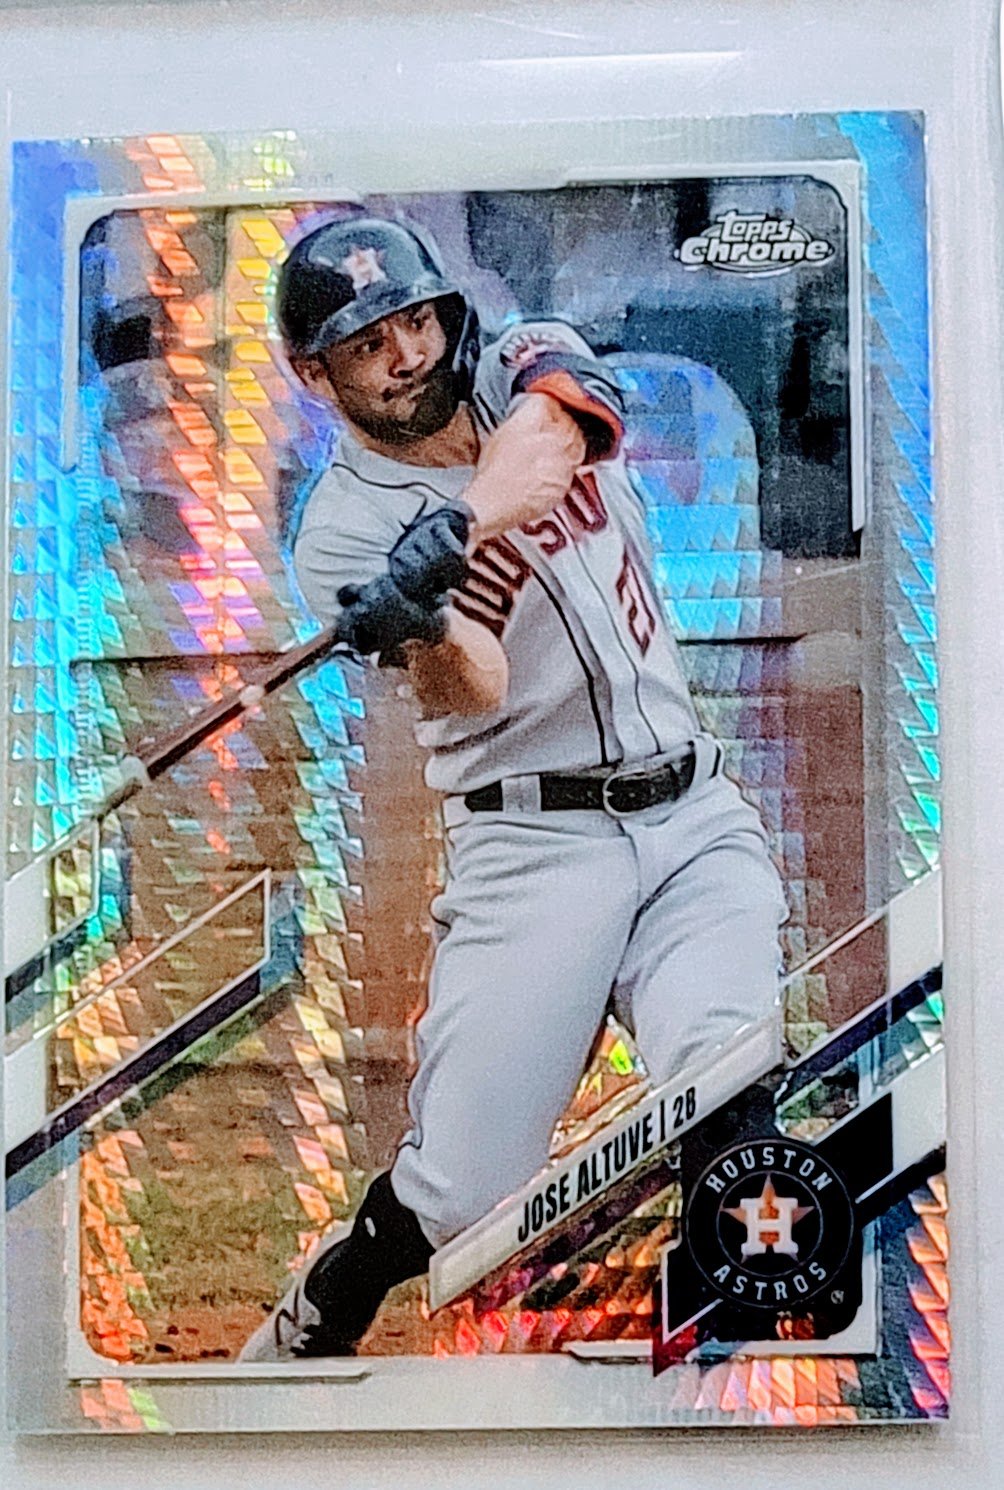 2021 Topps Chrome Jose Altuve Prism Refractor Baseball Card TPTV simple Xclusive Collectibles   